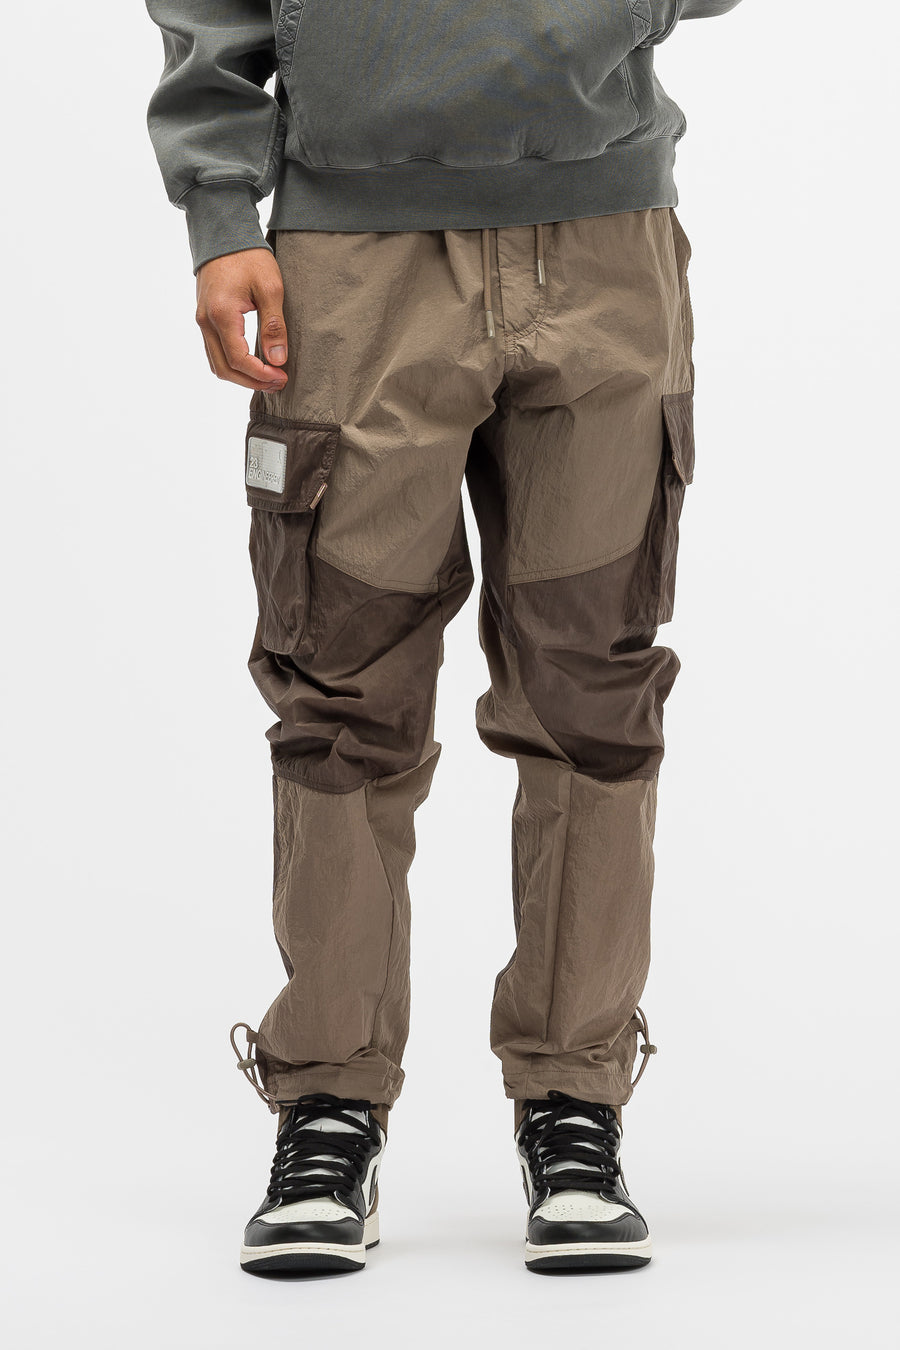 23 Engineered Cargo Pants in Olive Grey